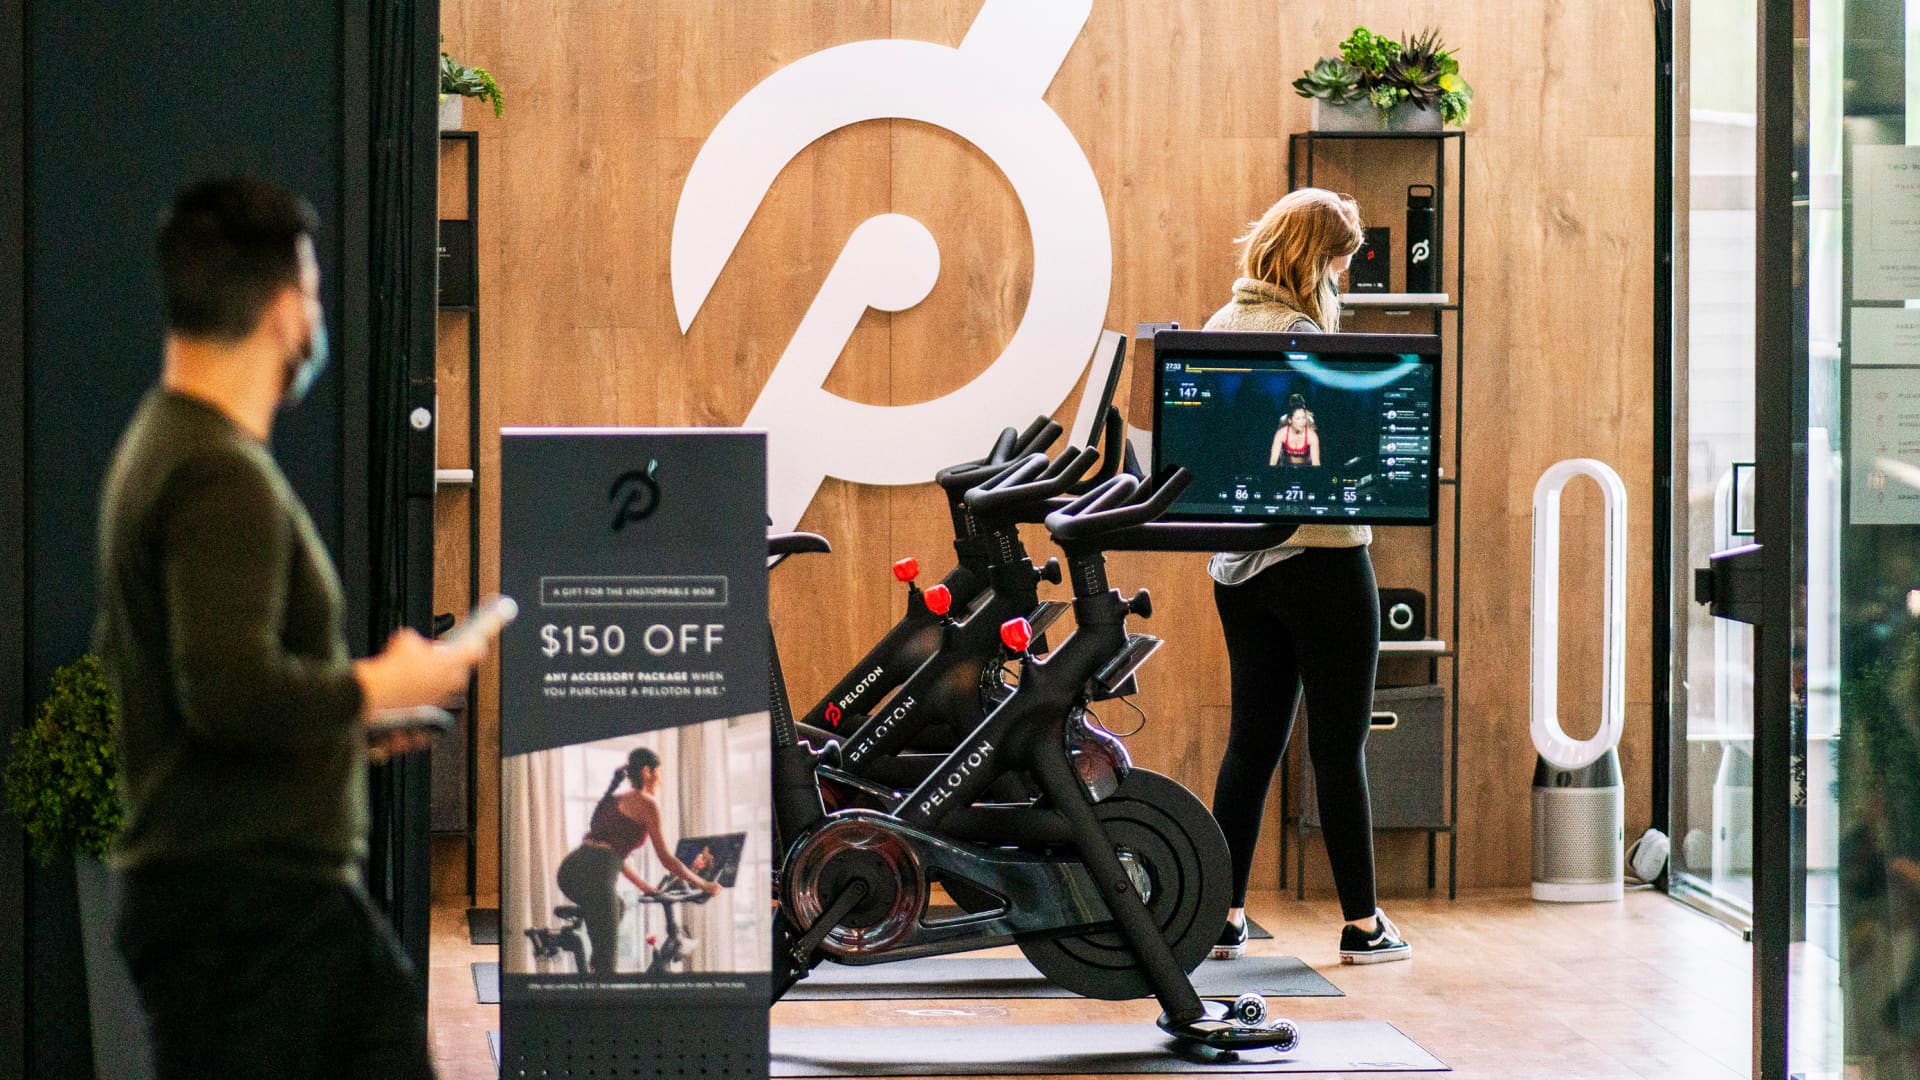 Peloton slashing 500 more jobs as it races to return to growth - CNBC : Peloton is cutting about 500 jobs, but CEO Barry McCarthy says no further layoffs are planned.  | Tranquility 國際社群